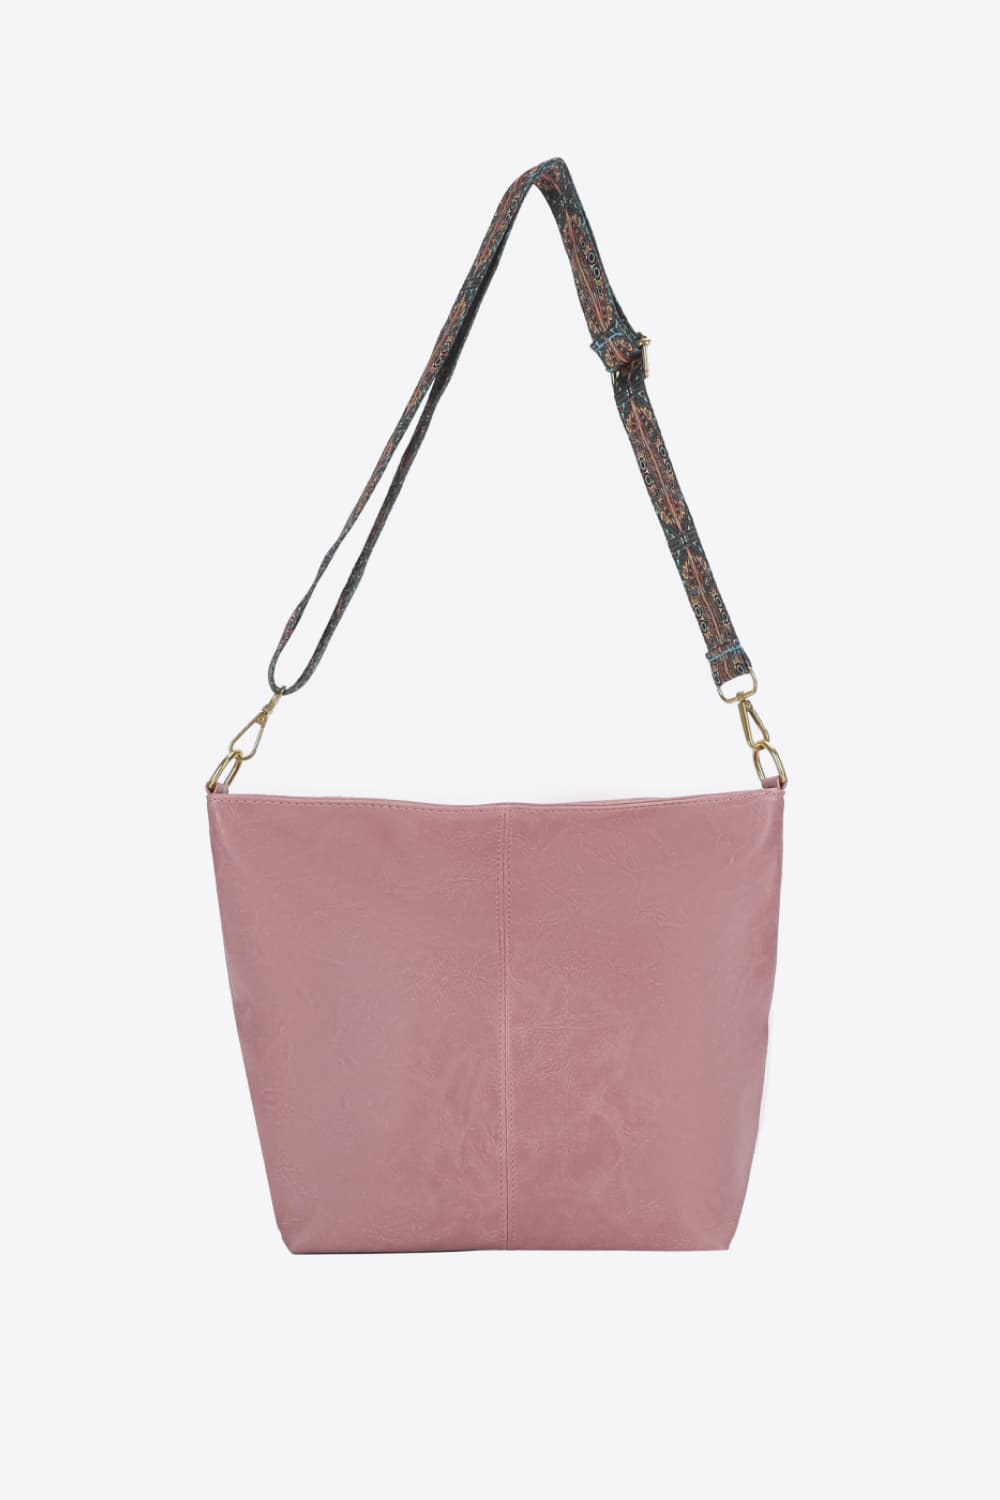 PU Leather Crossbody Bag Dusty Pink One Size